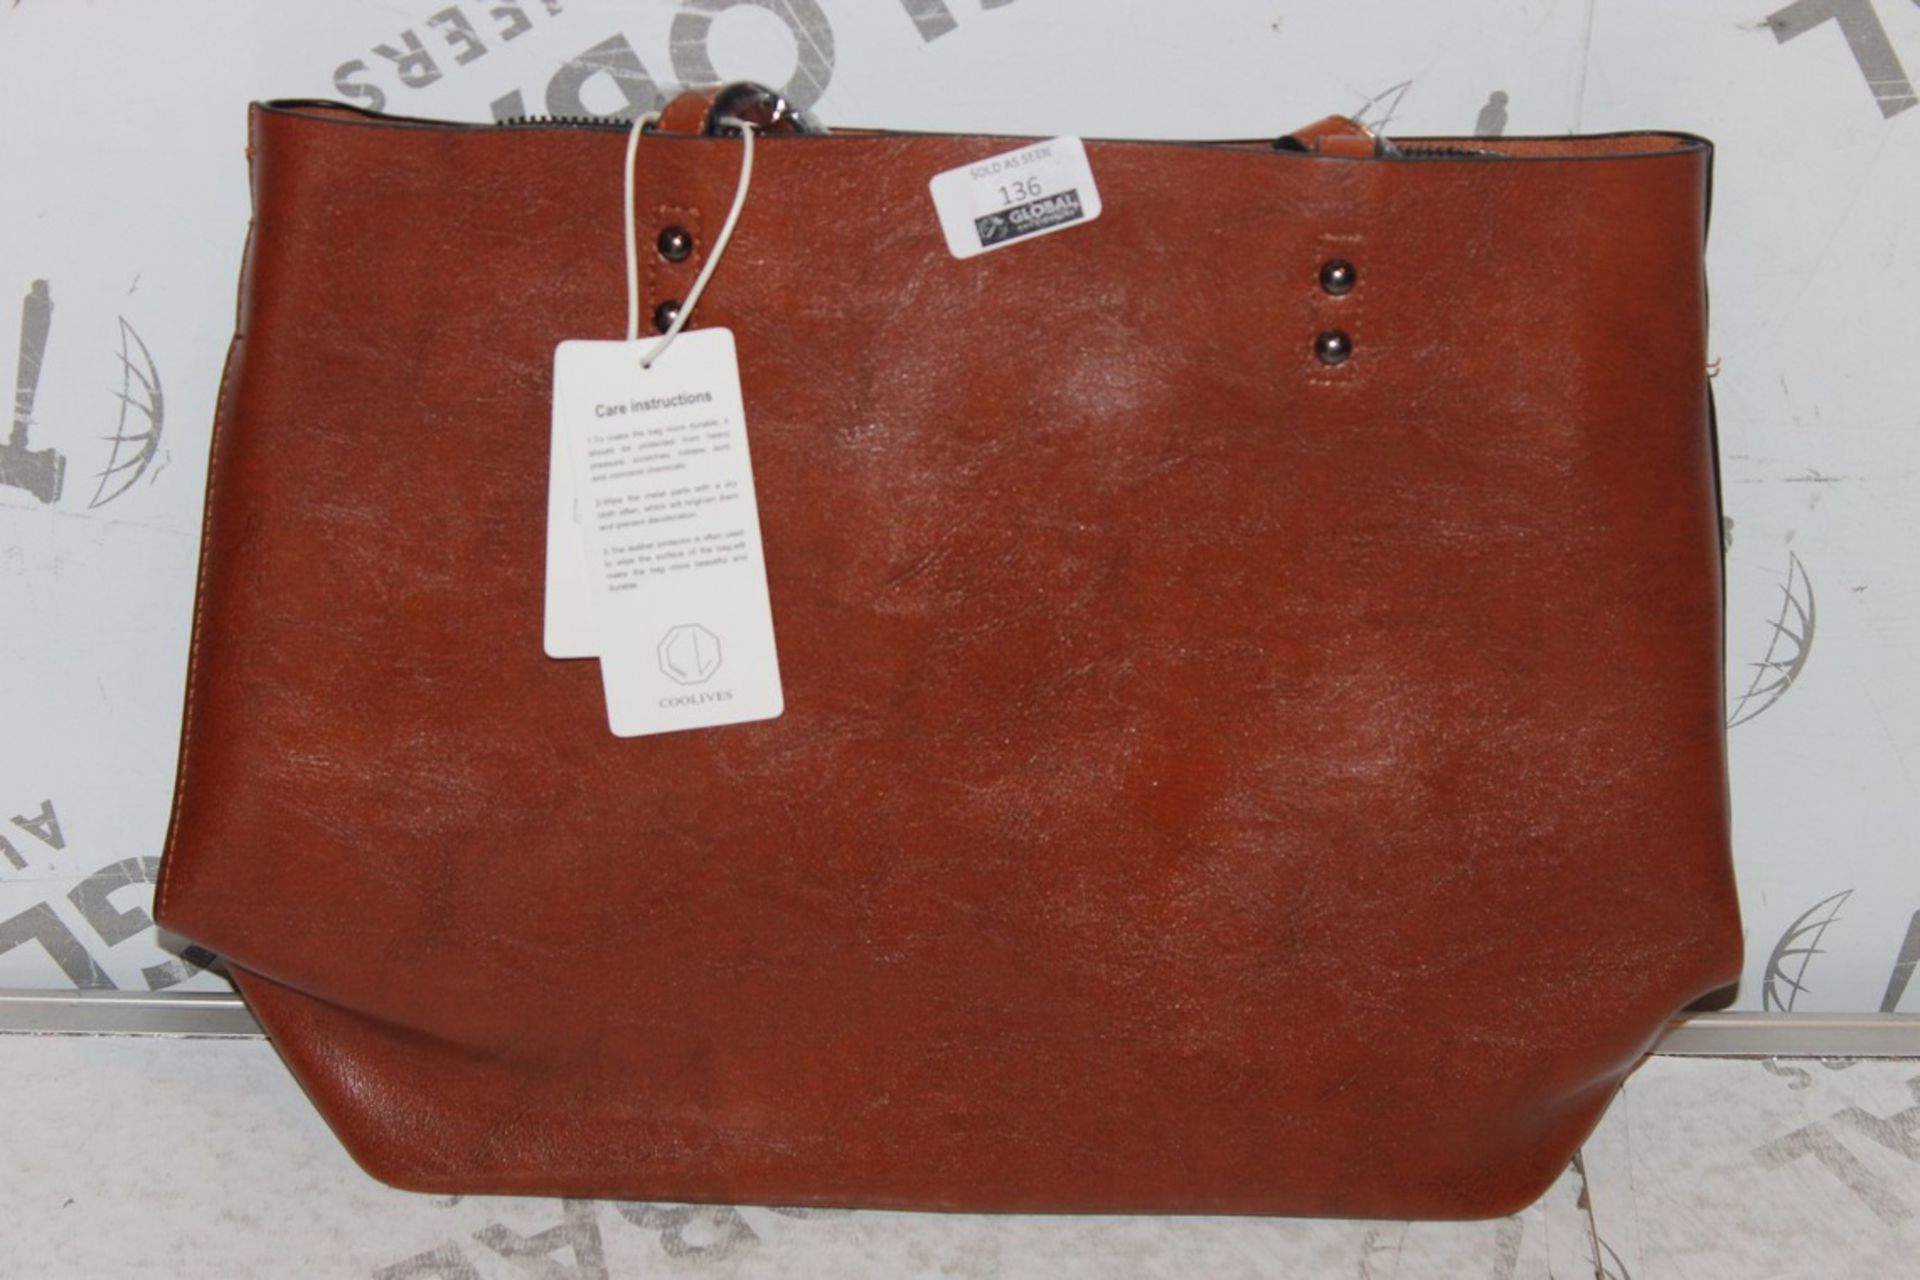 Brand New Womens, Coolives, Tan Leather Single Tote Handbag, RRP £45.00